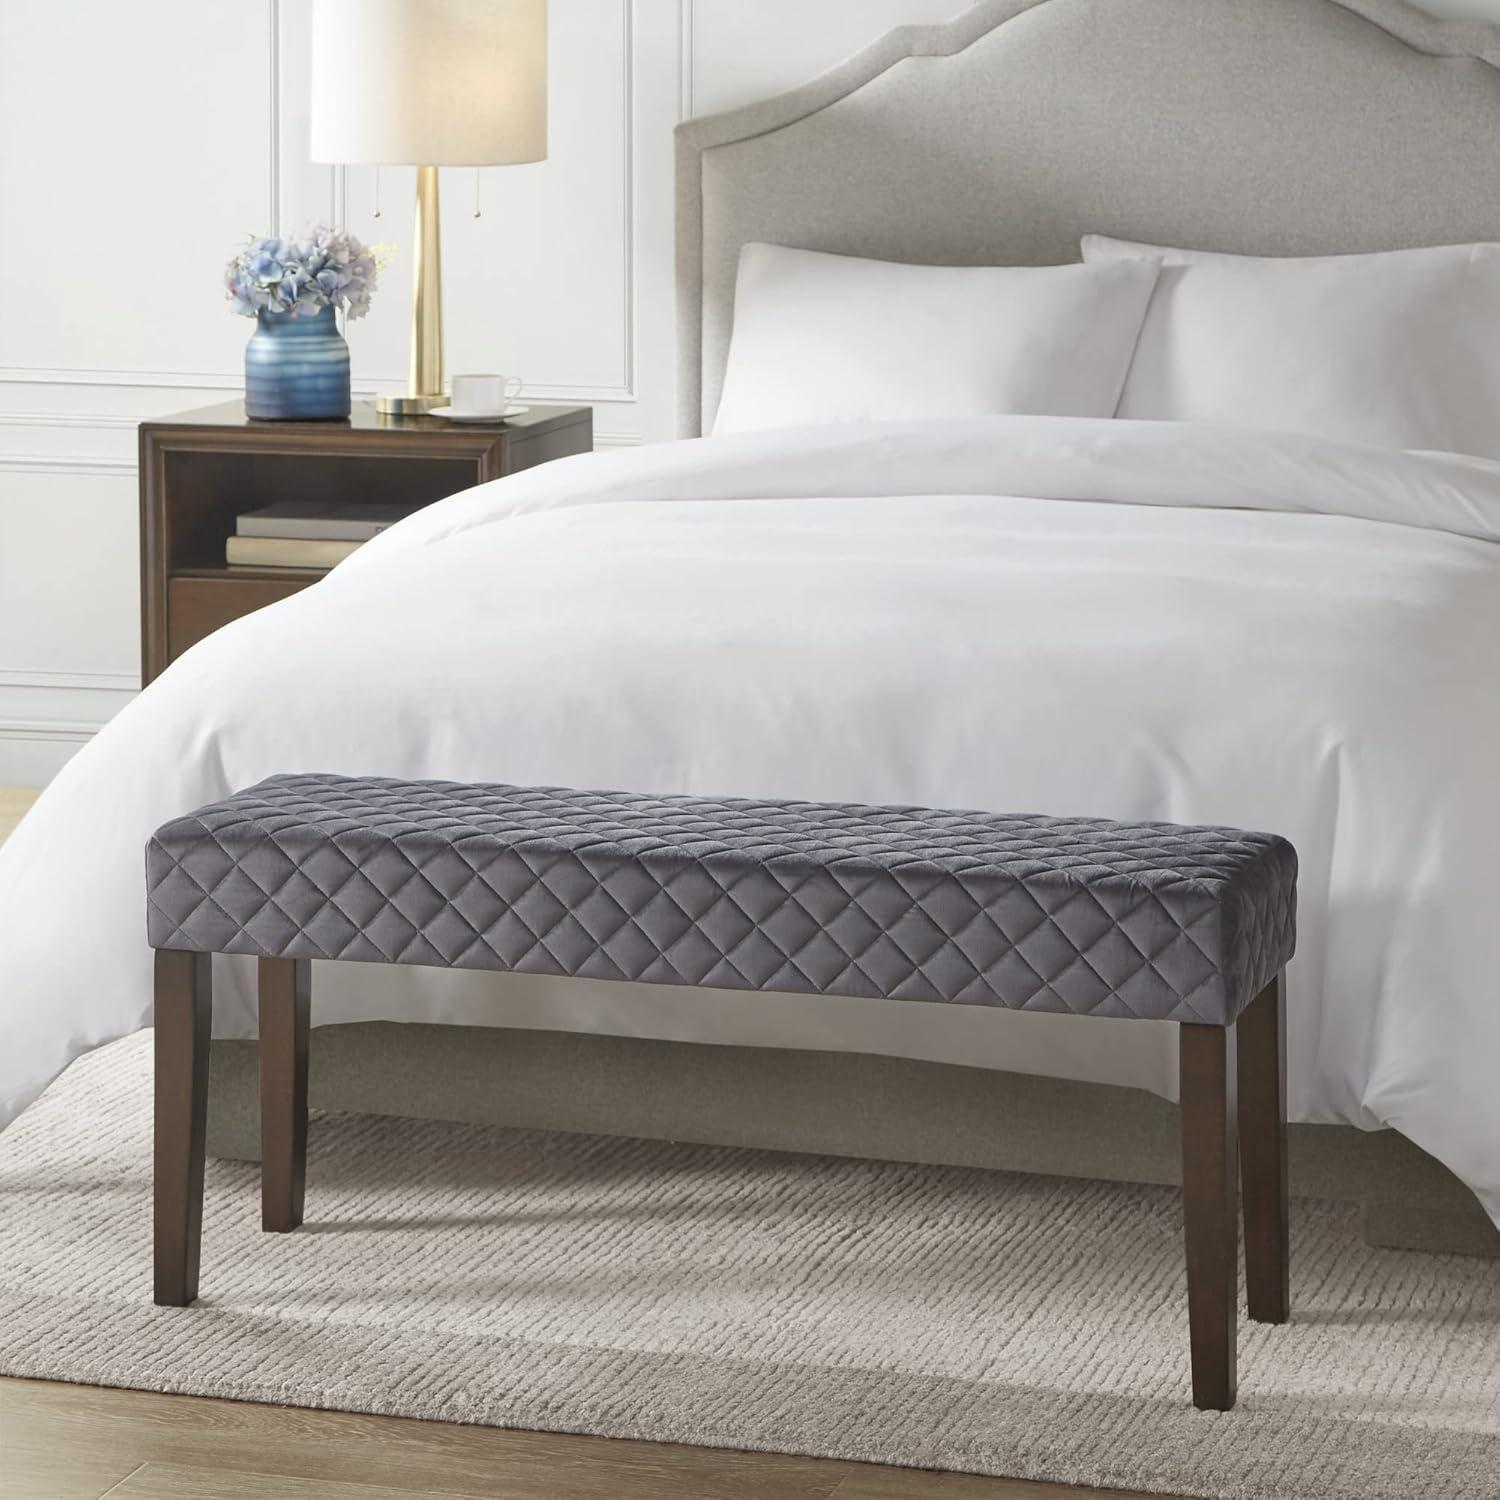 Cheshire Gray Diamond Quilted Upholstered Accent Bench with Moroccan Wood Legs